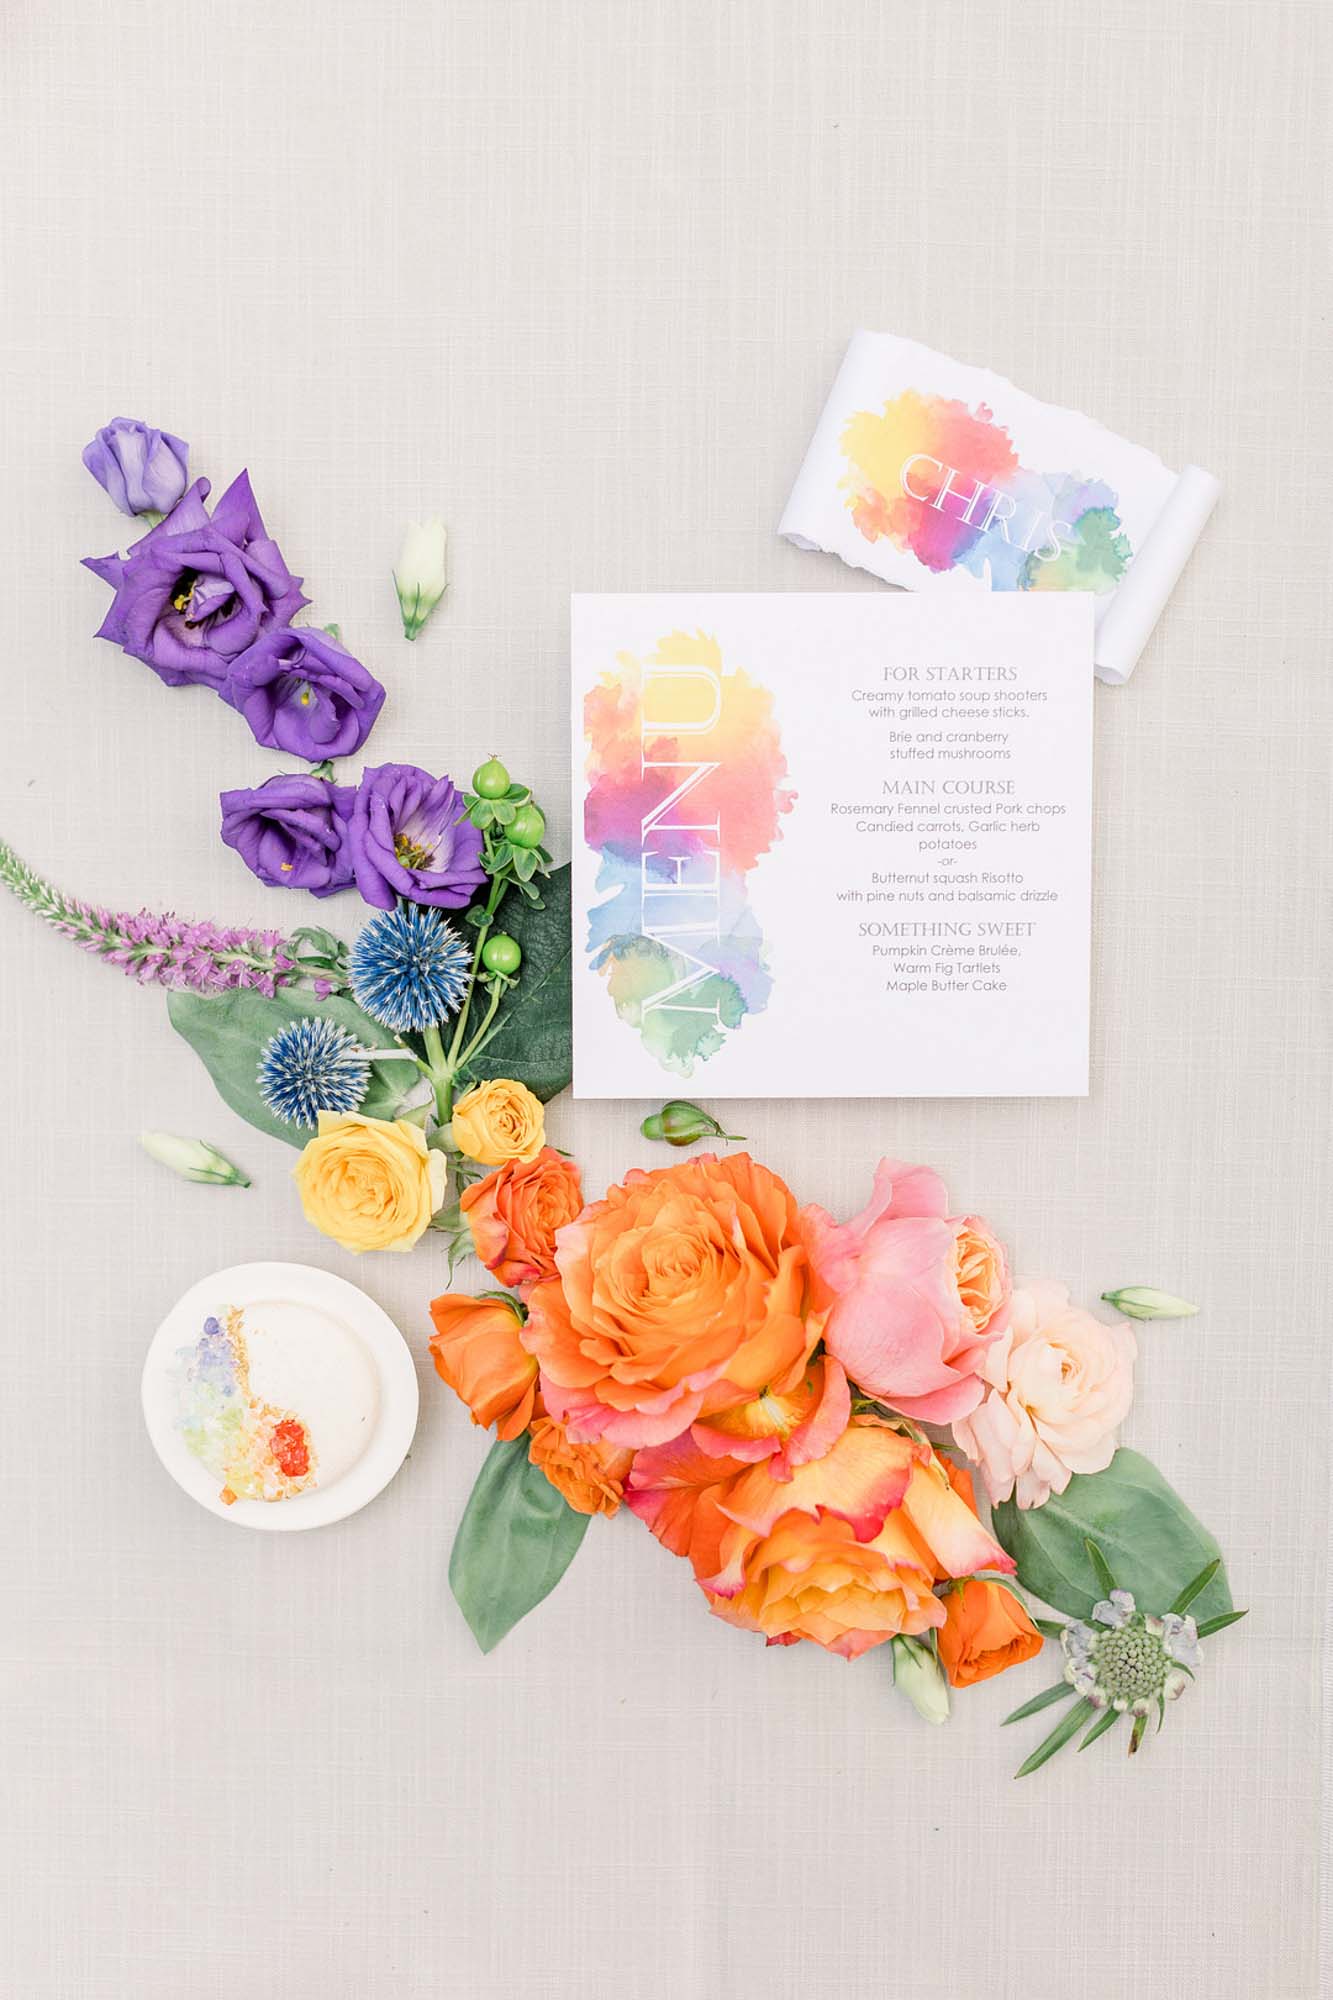 Chic and whimsical Pride-themed wedding ideas | Alexis Belli Photography | Featured on Equally Wed, the leading LGBTQ+ wedding magazine